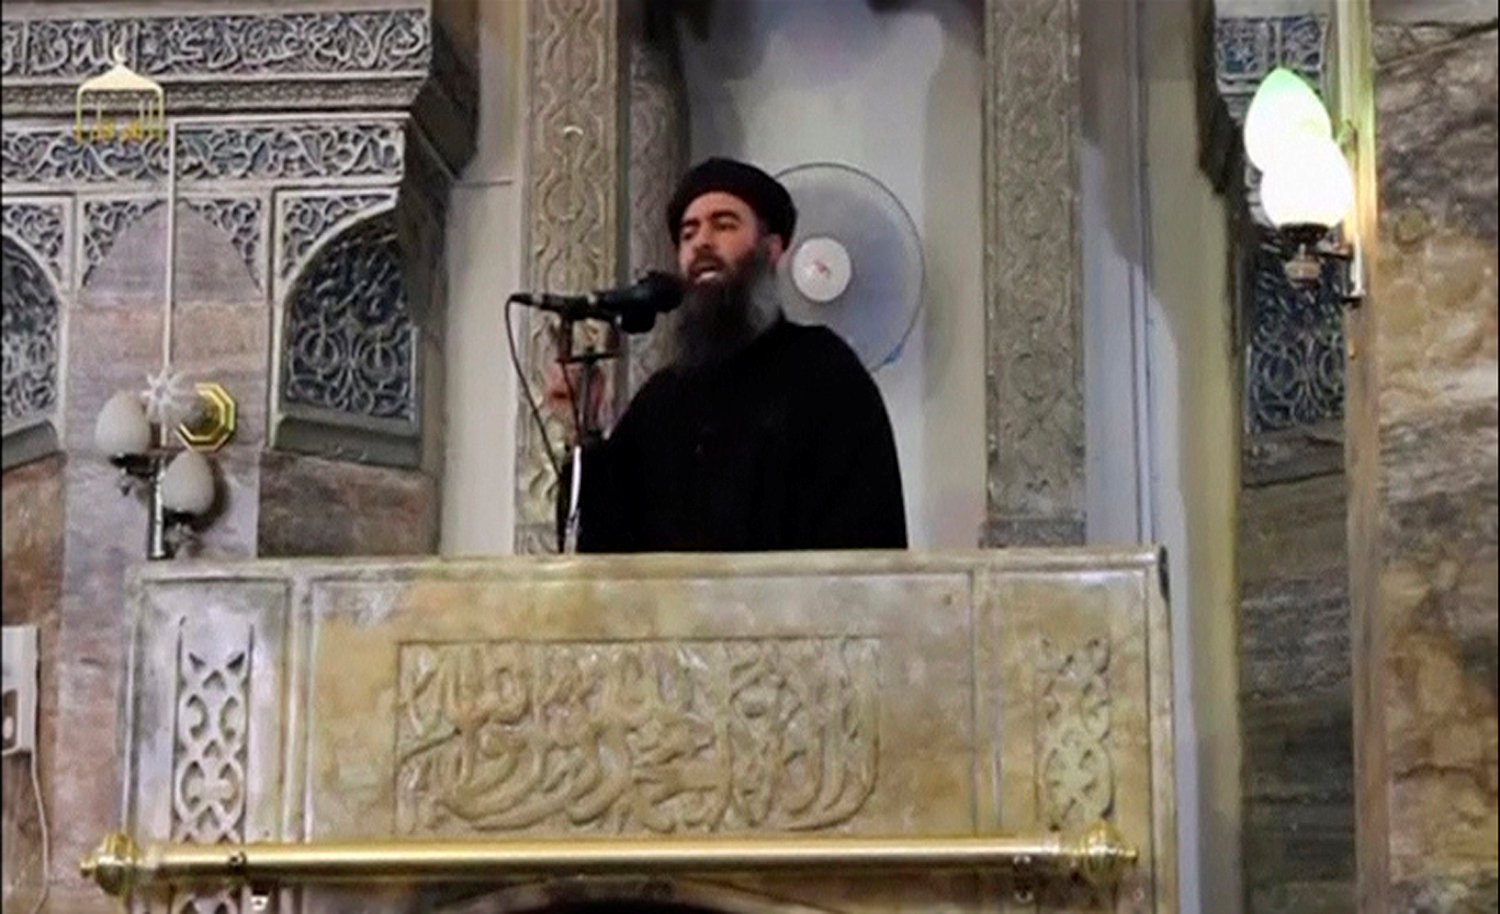 A man purported to be the reclusive leader of the militant Islamic State Abu Bakr al-Baghdadi making what would have been his first public appearance, at a mosque in the centre of Iraq's second city, Mosul, according to a video recording posted on the Int